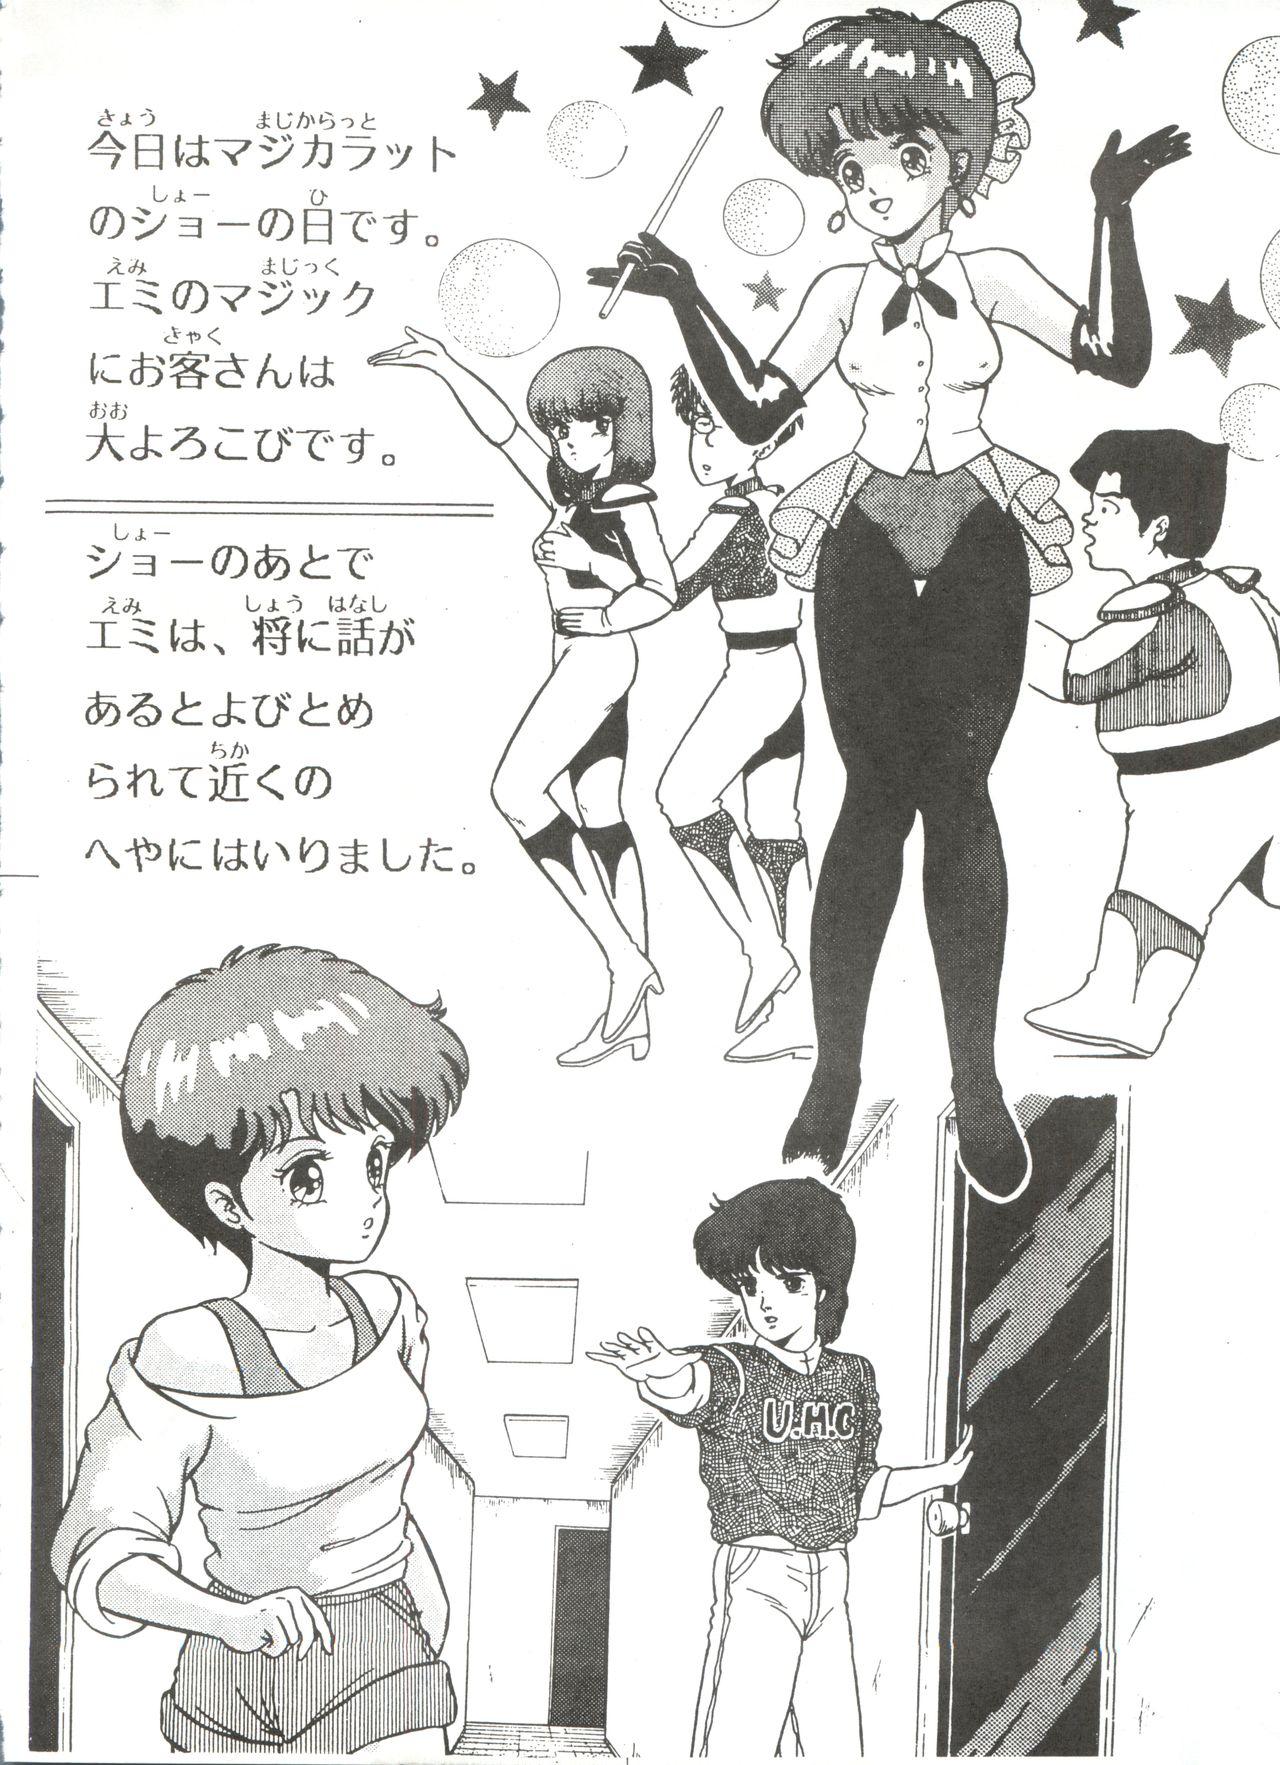 Couples Fucking Look Out 3R - Maison ikkoku Magical emi Gundam zz The super dimension fortress macross Newbie - Page 6